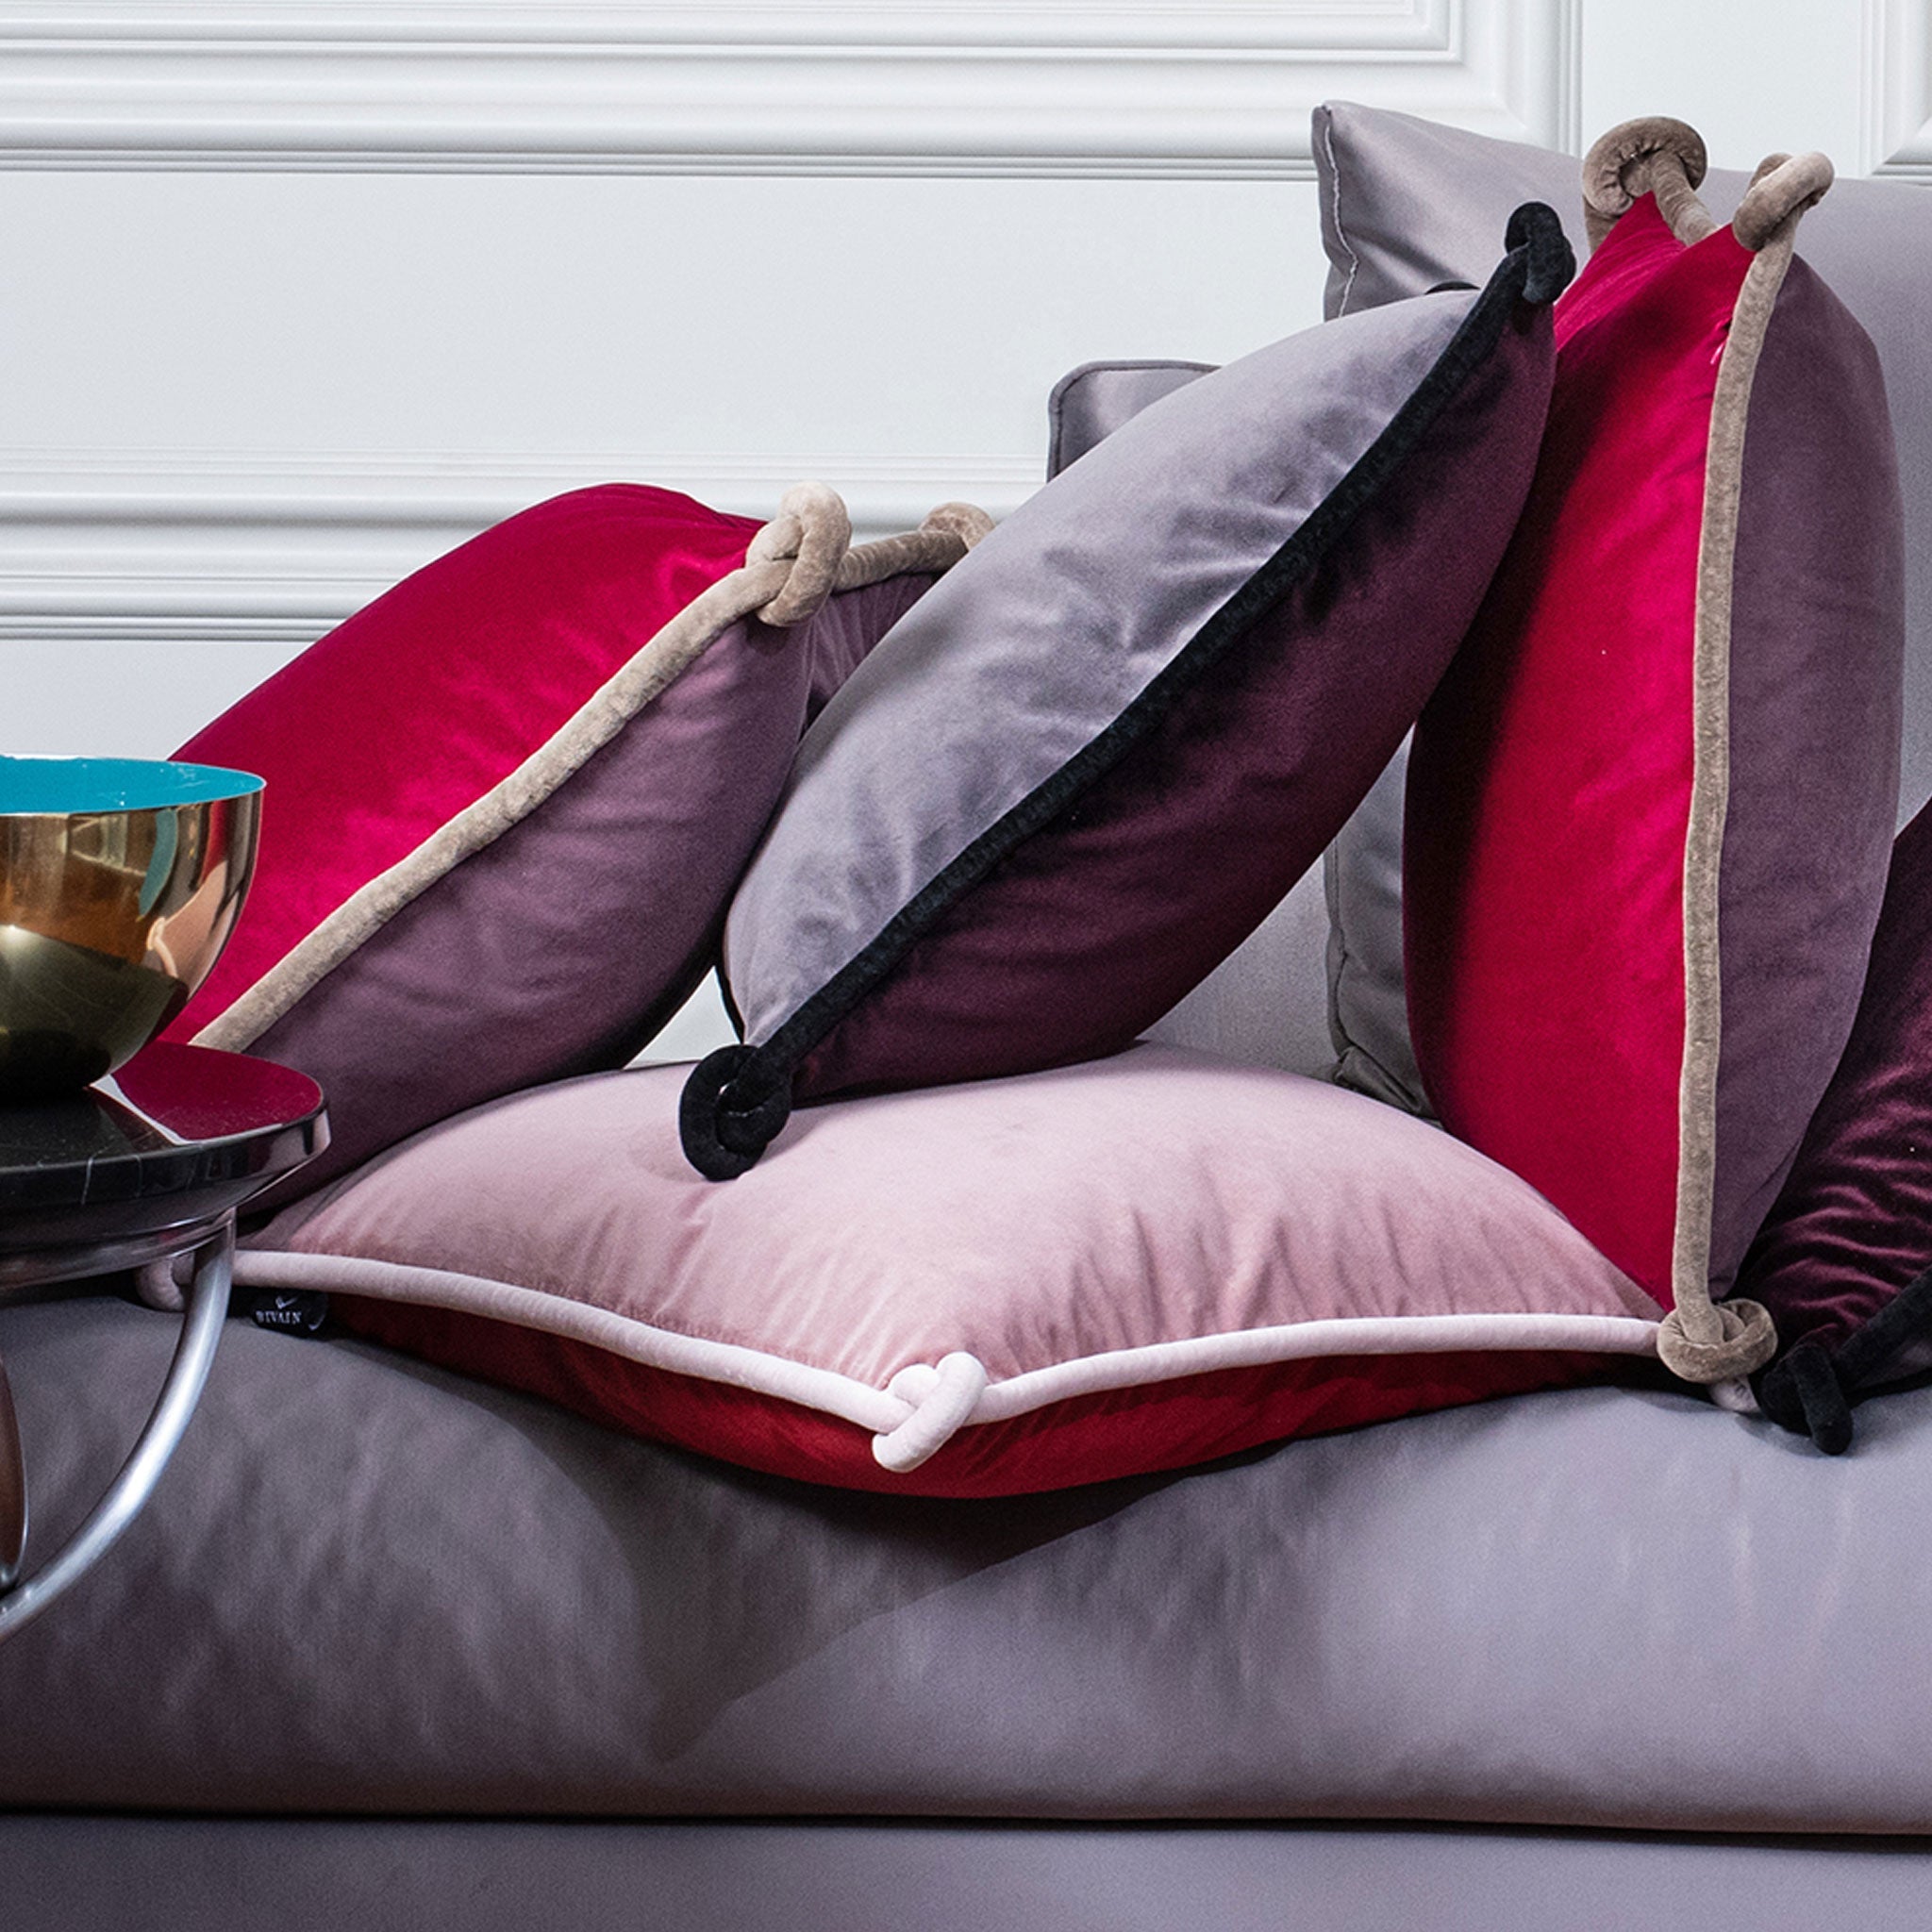 BIVAIN-C0134-Plum-and-grey-velvet-cushion-with-black-piping.jpg